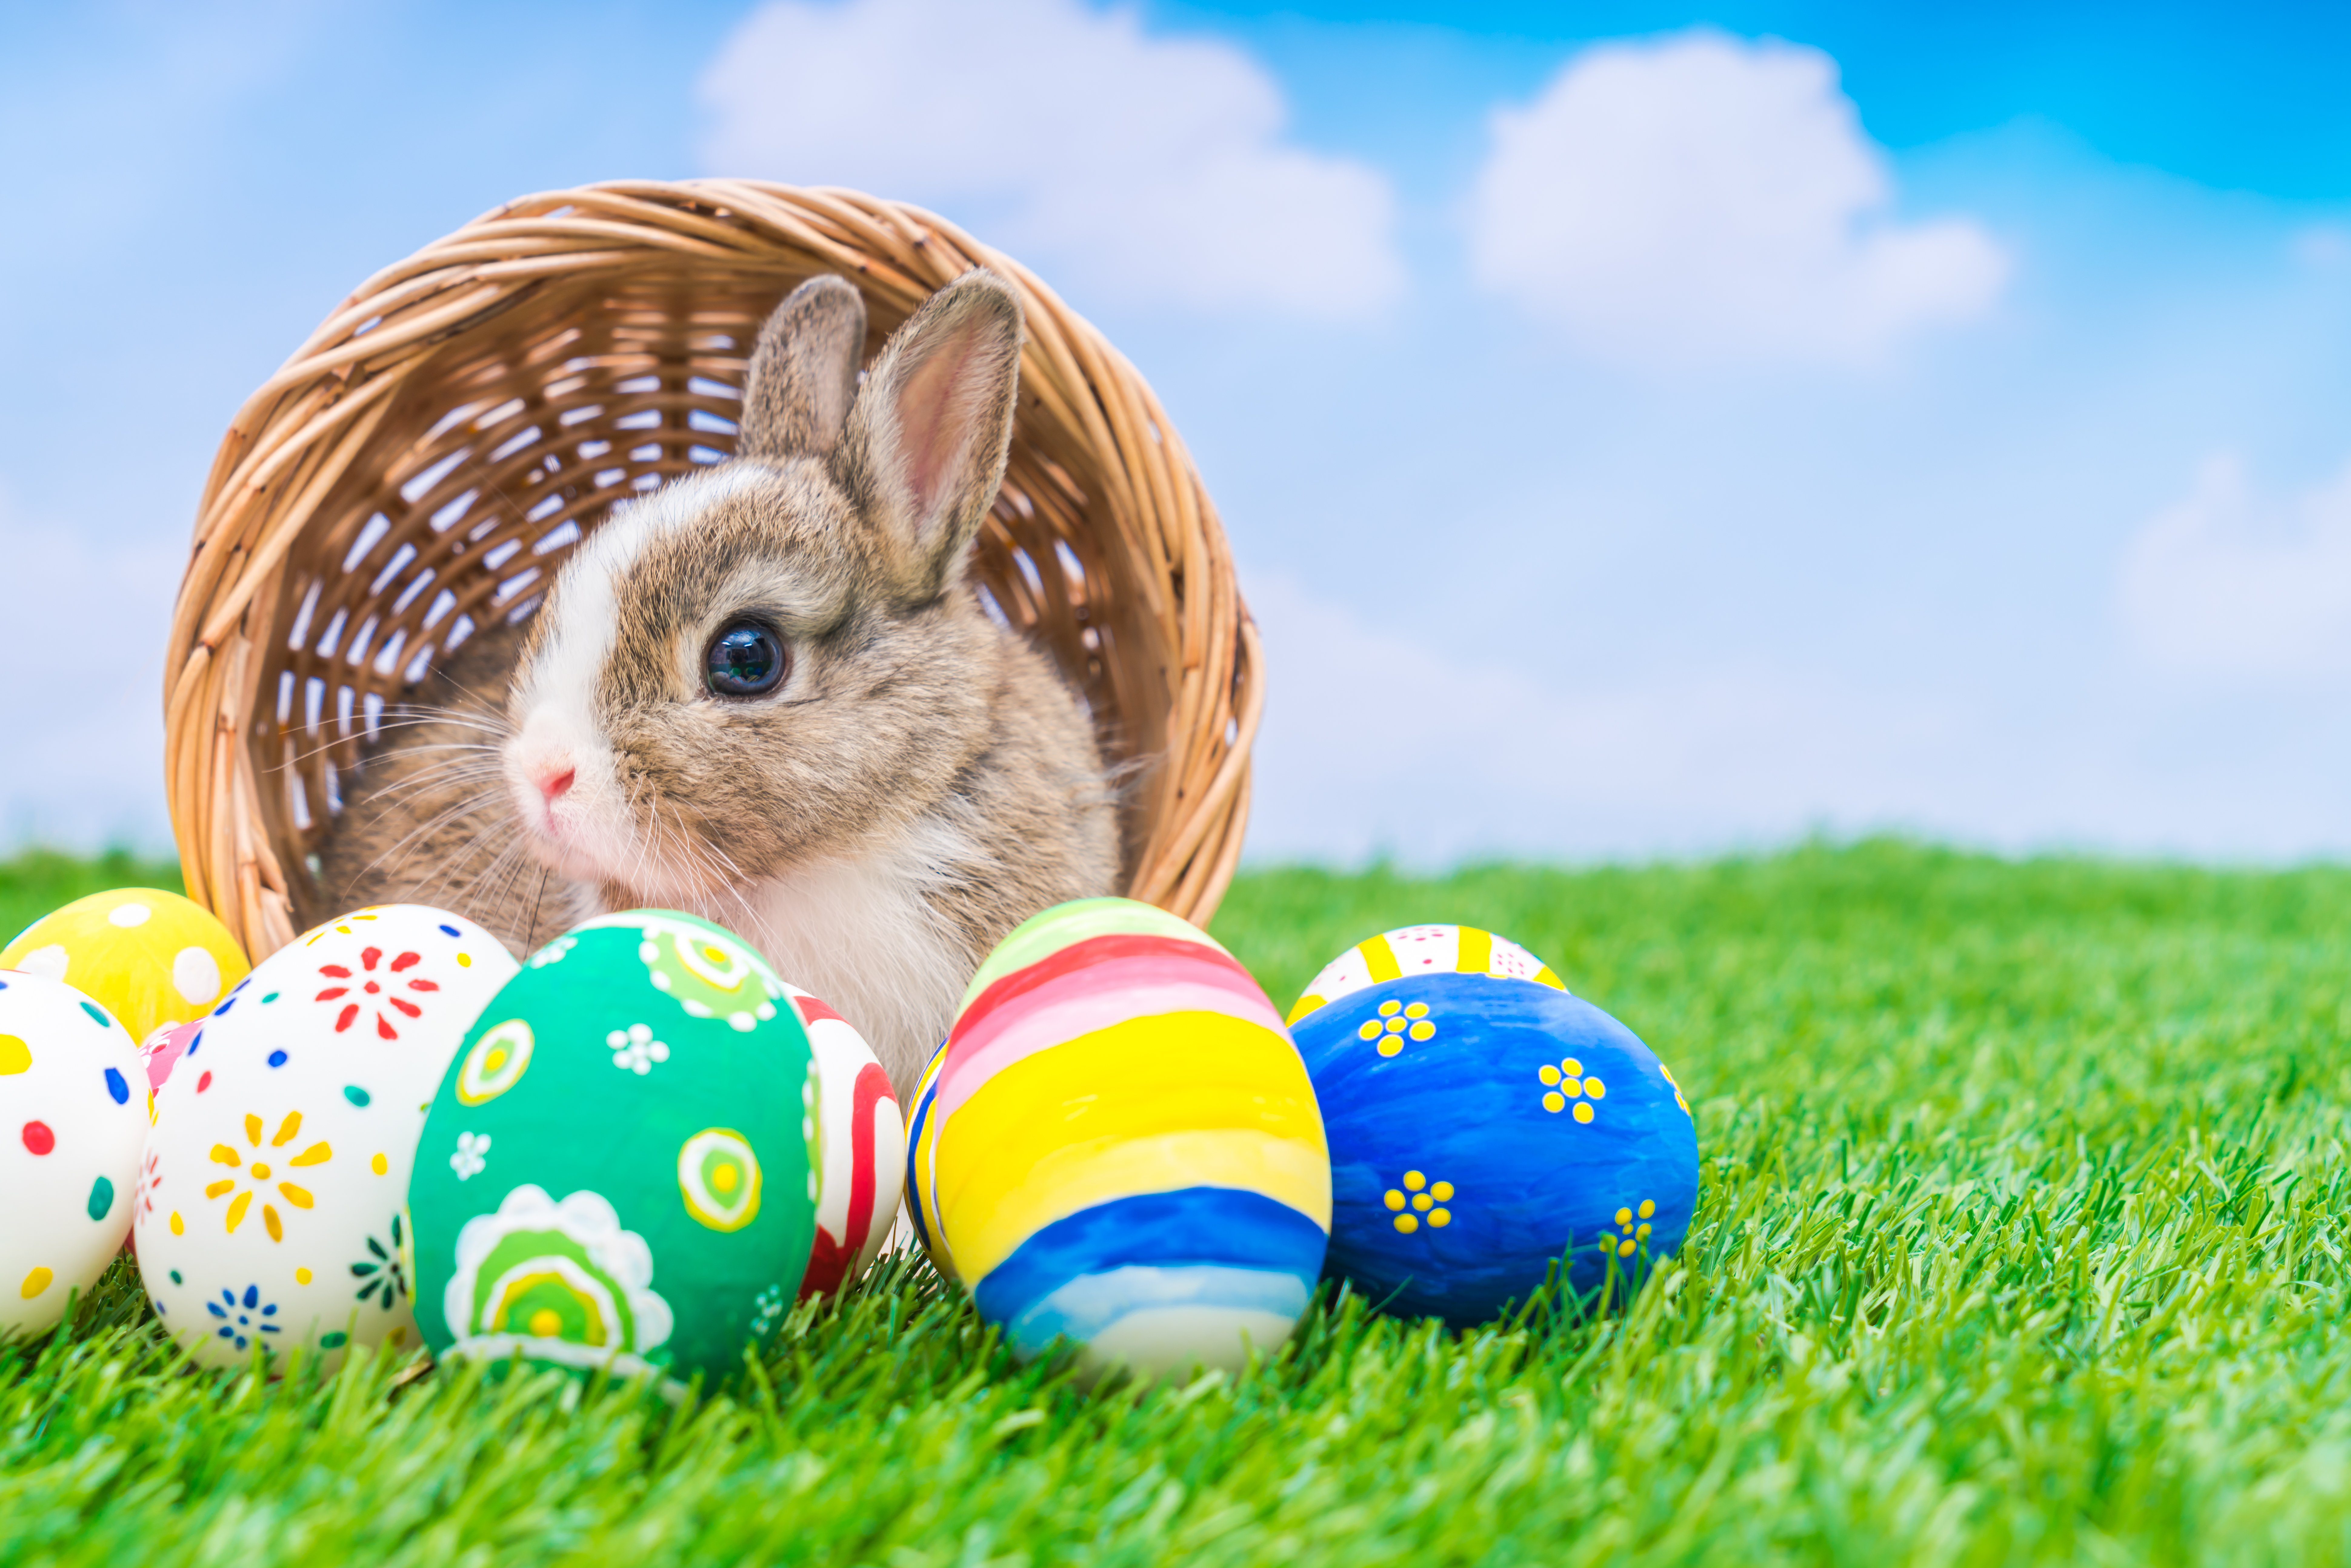 A rabbit and colored Easter eggs. | Source: Freepik